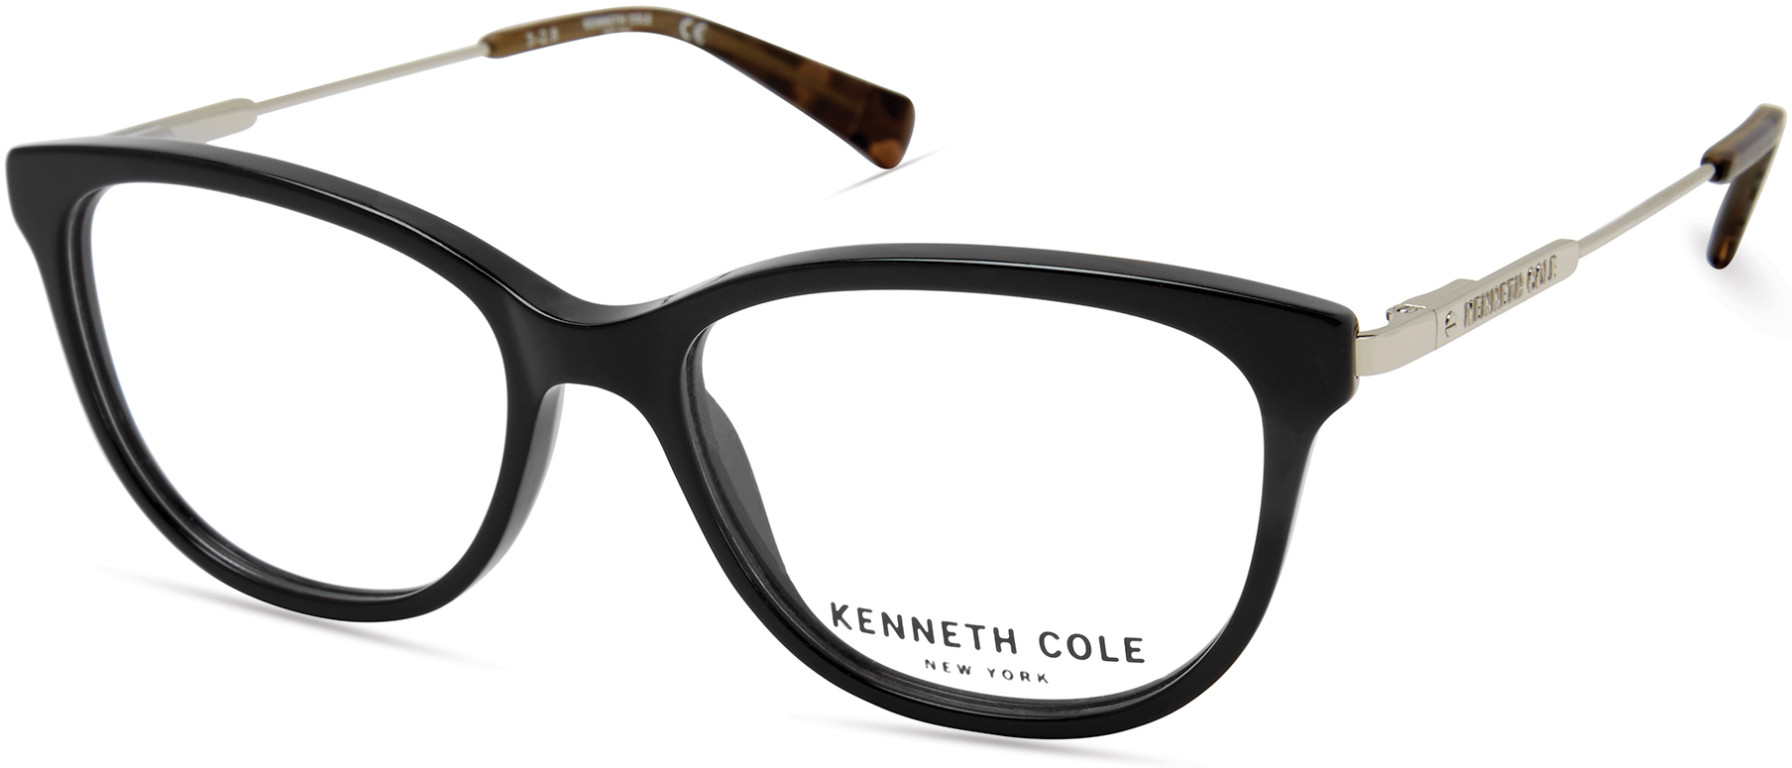 KENNETH COLE NY 0298